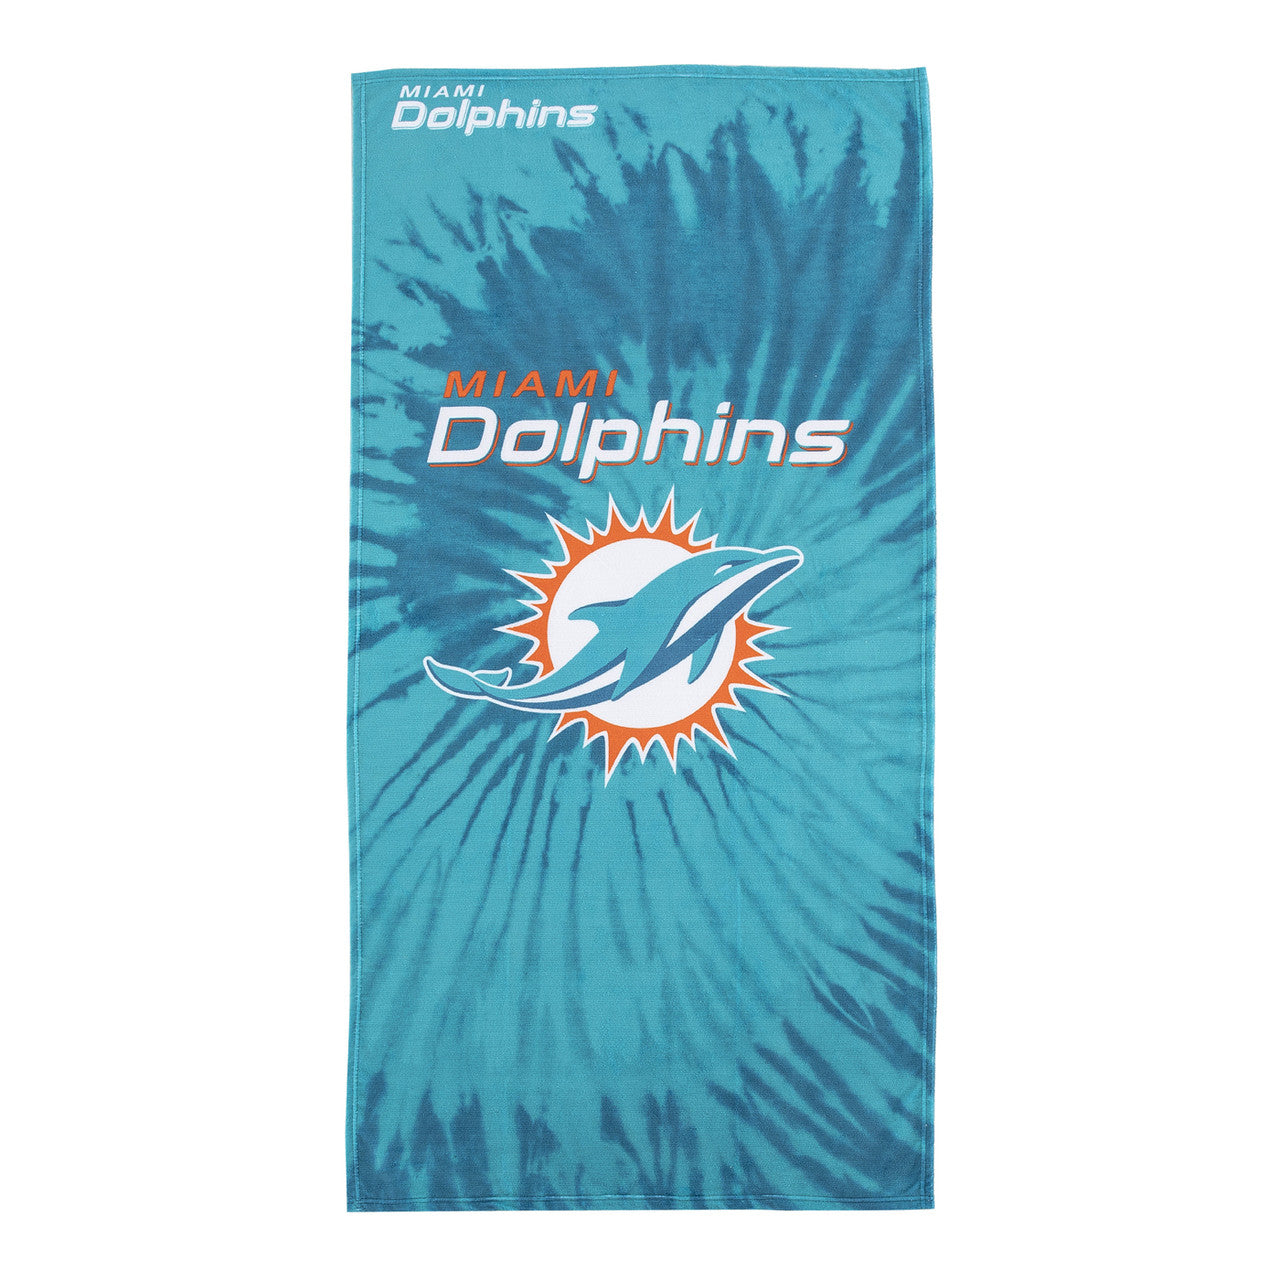 Miami Dolphins Psychedelic Beach Towel - 30" x 60"